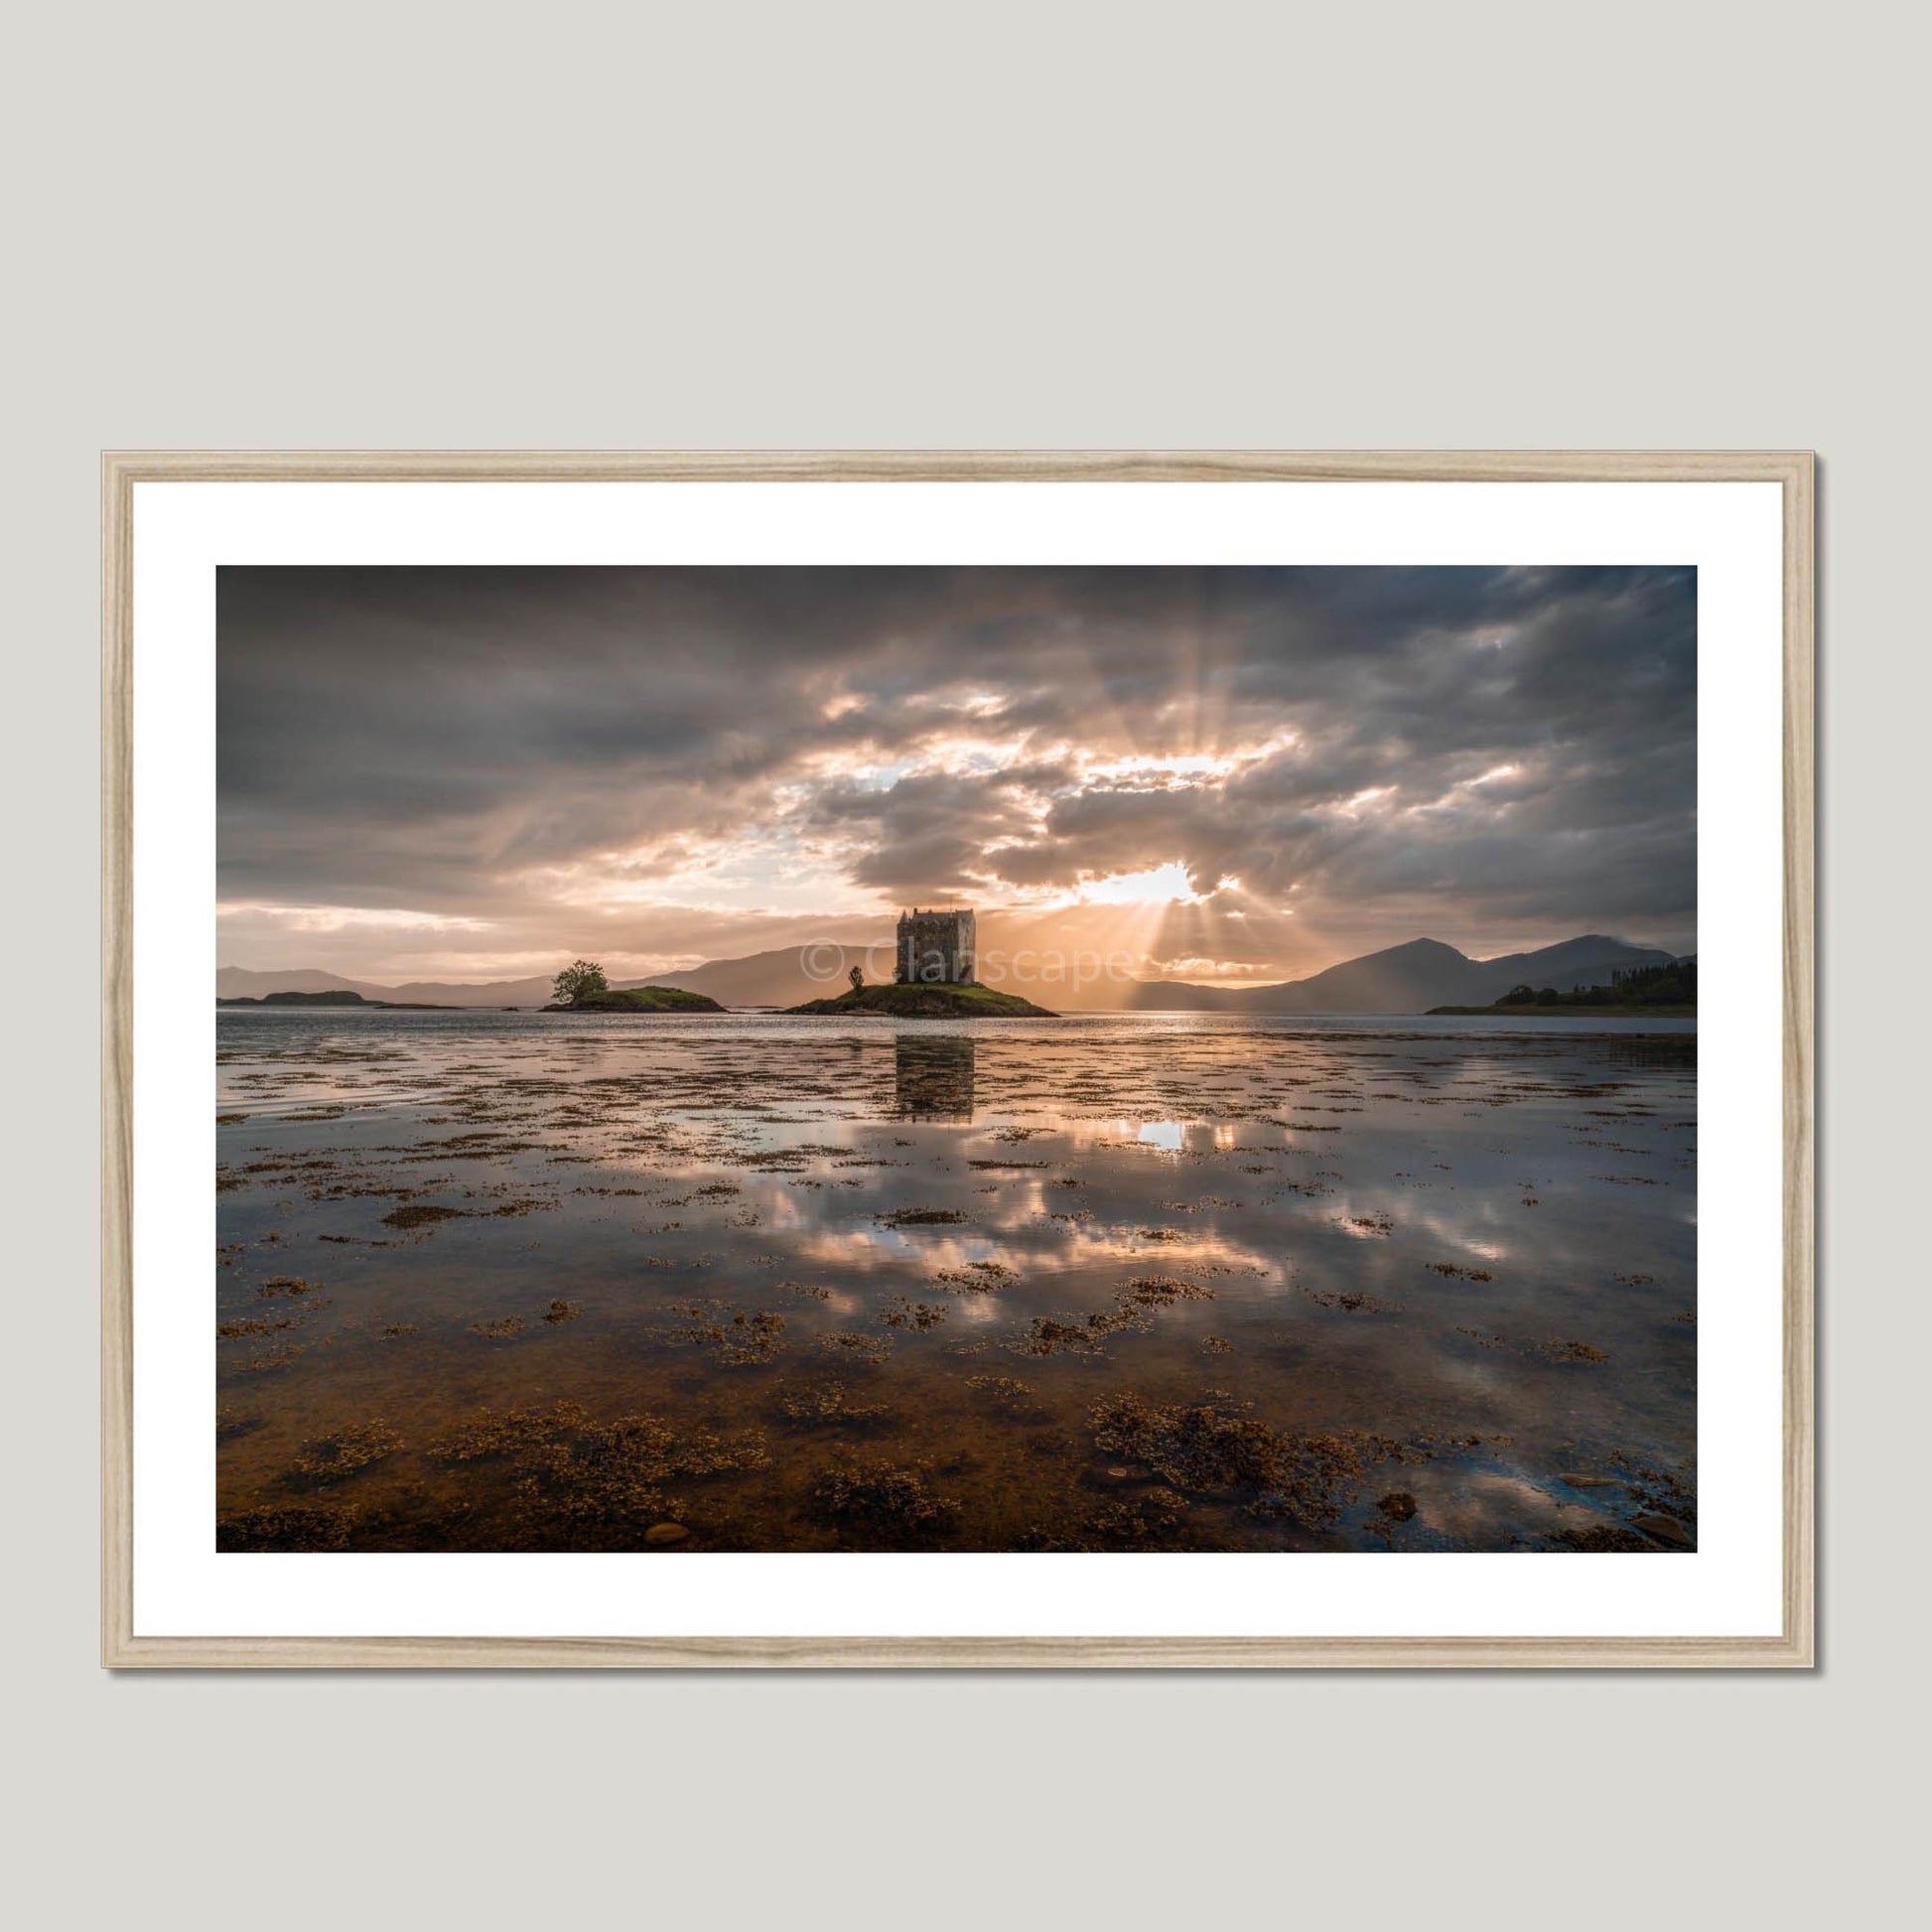 Clan Stewart of Appin - Castle Stalker - Framed & Mounted Photo Print 40"x28" Natural